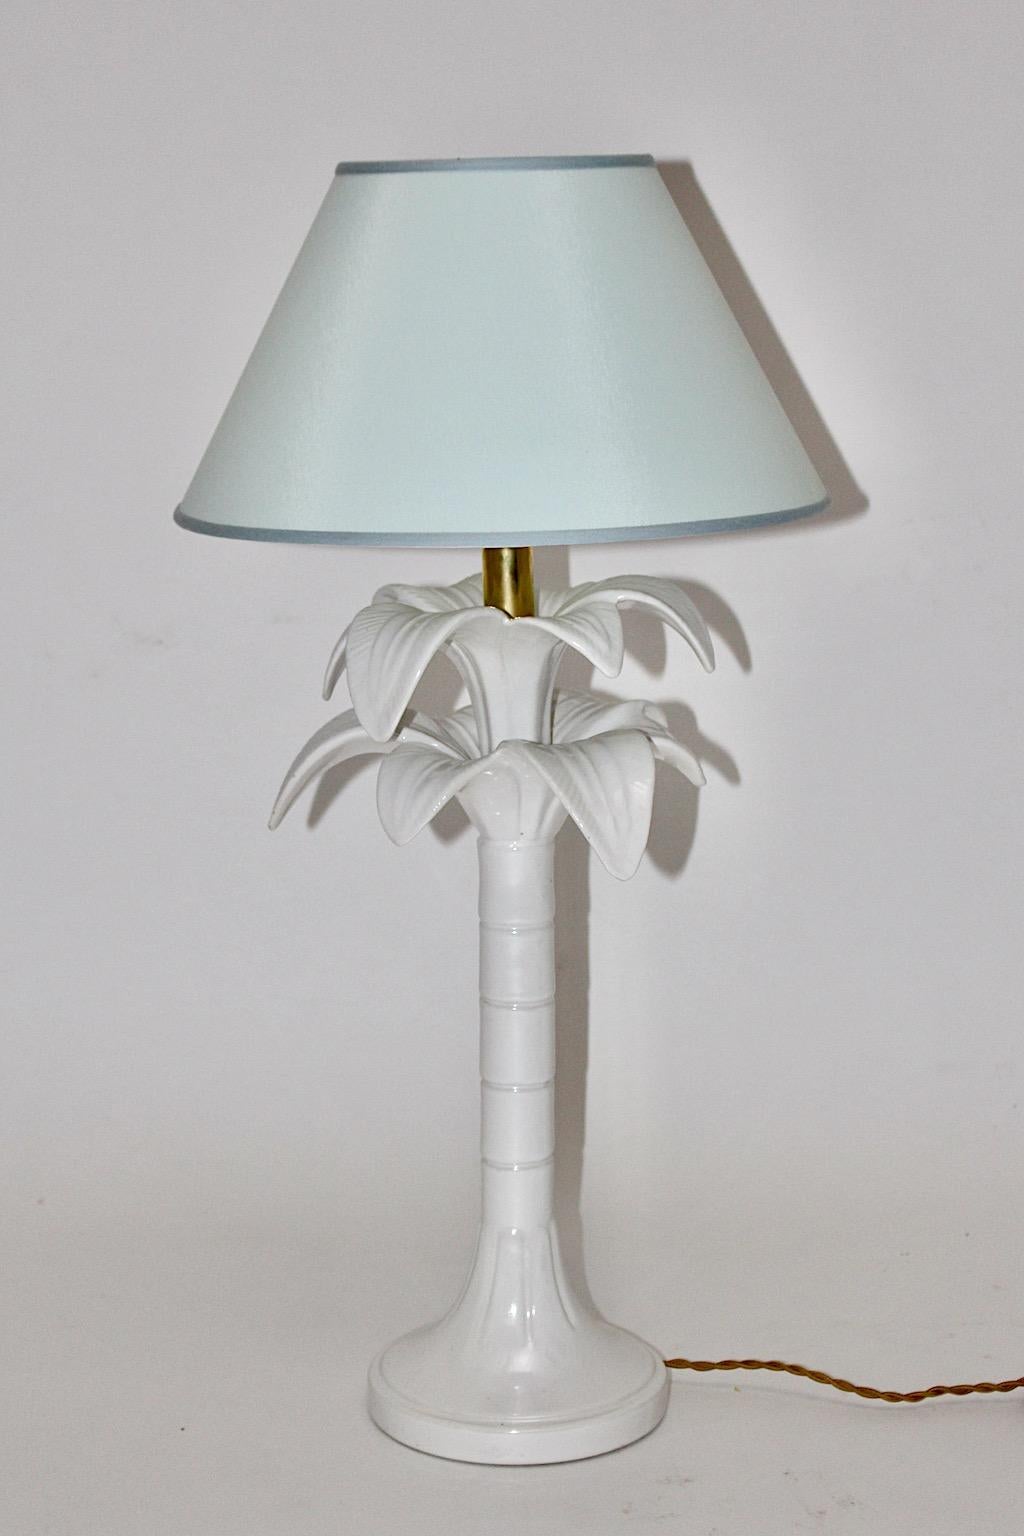 Mid-Century Modern Tommaso Barbi Vintage White Ceramic Brass Palm Tree Table Lamp 1970s Italy For Sale